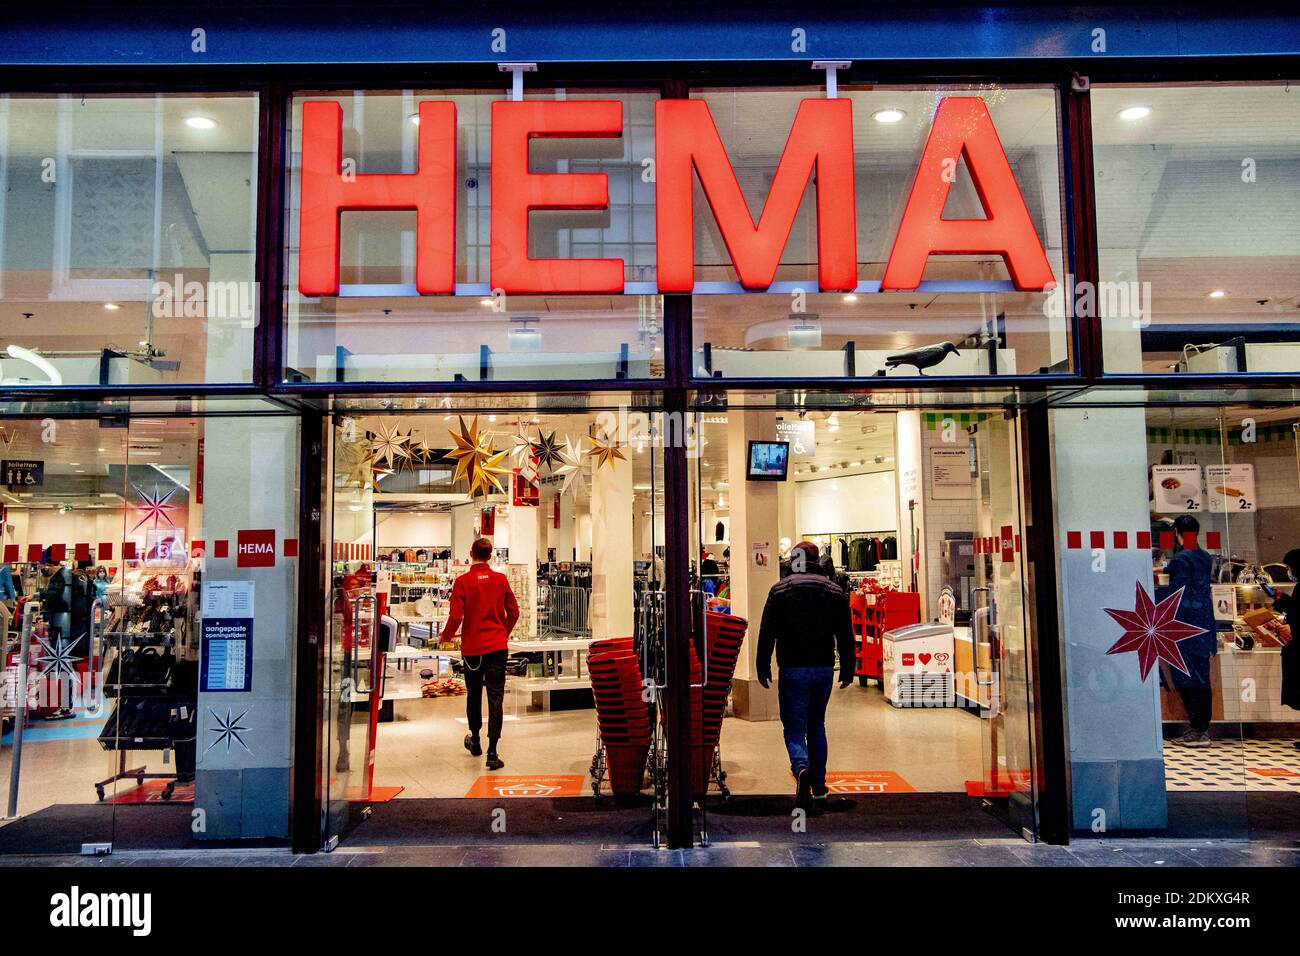 shoppers are seen in A Hema supermarket December 16, 2020 in Rotterdam. Hema has declared itself the Netherlands' biggest bakery and is also open for business but has roped off